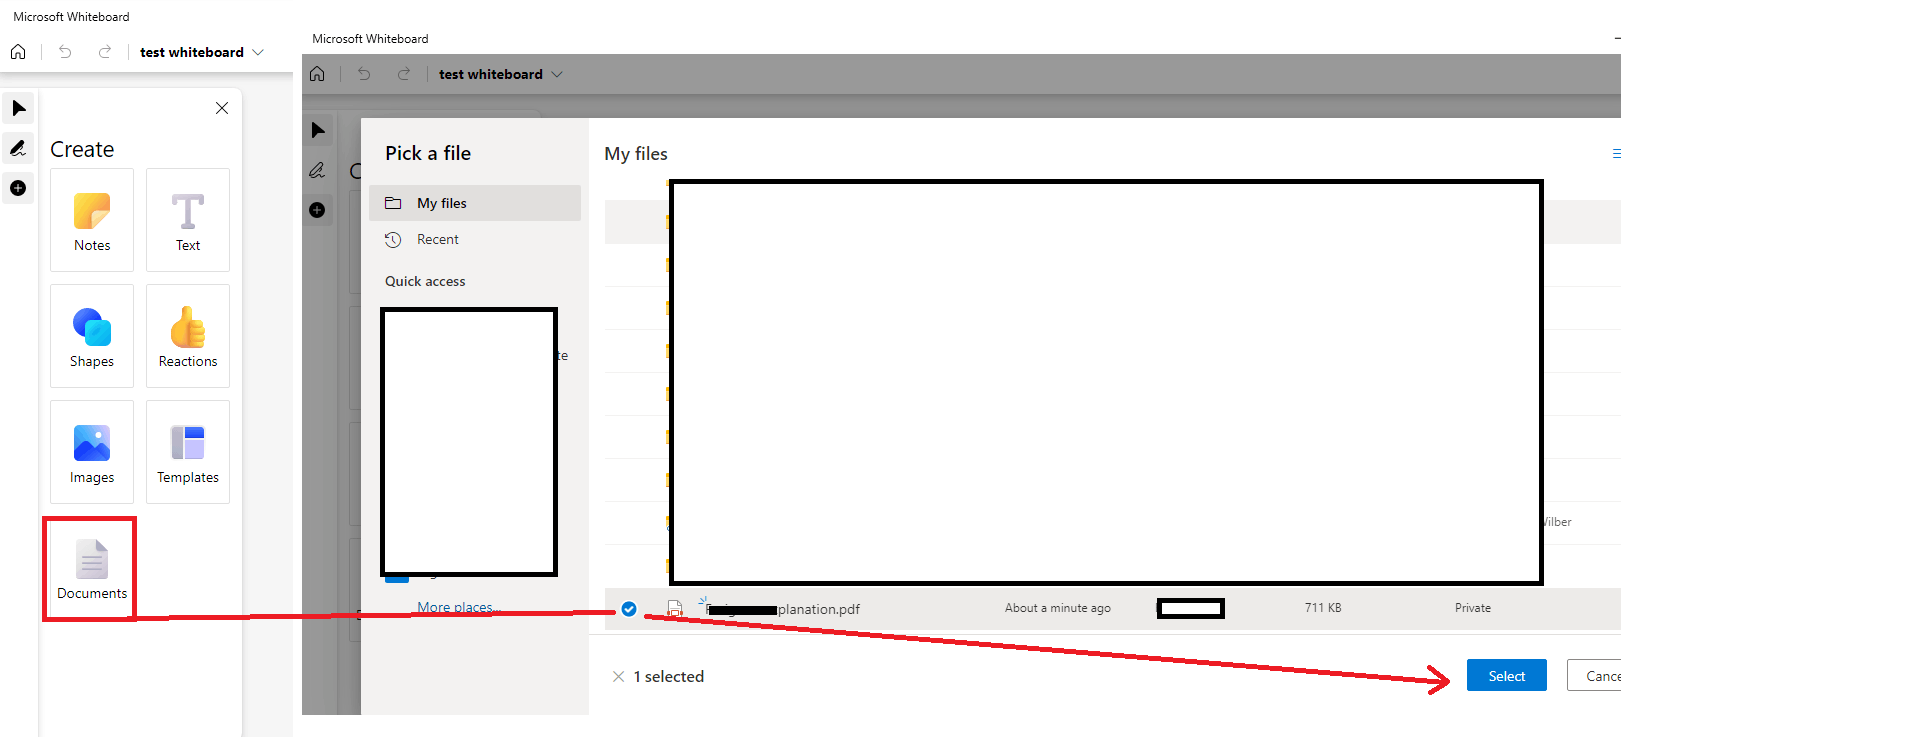 The newest version of the whiteboard does not show the function of inserting images from... 20b6de94-7c6e-468b-808b-56b6e5d54588?upload=true.png